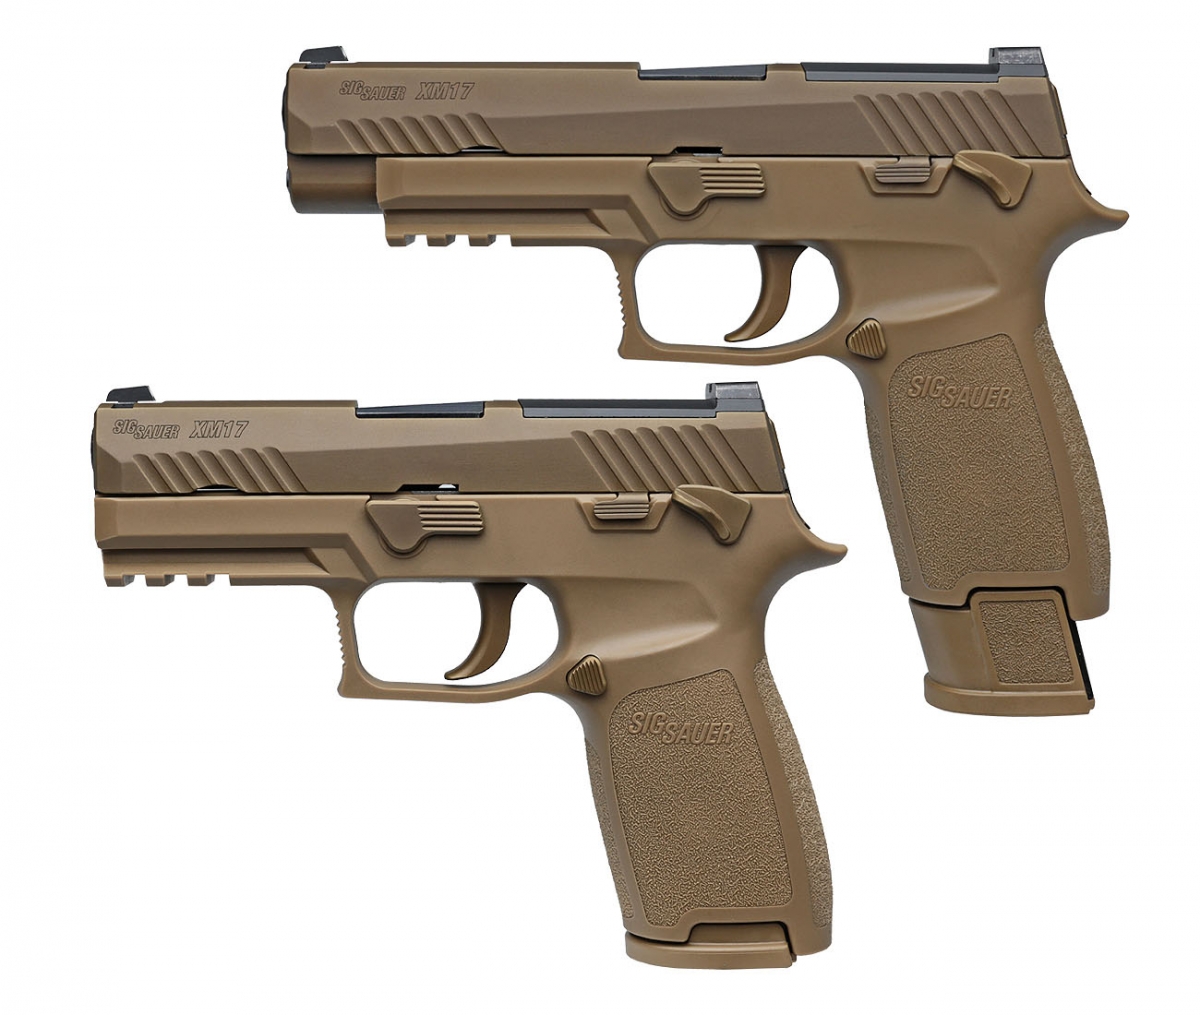 The SIG Sauer M17/M18 MHS is a modular P320-based pistol, built on a standard frame and compatible with different calibers, slides, barrels and magazines to adapt itself to different operative needs